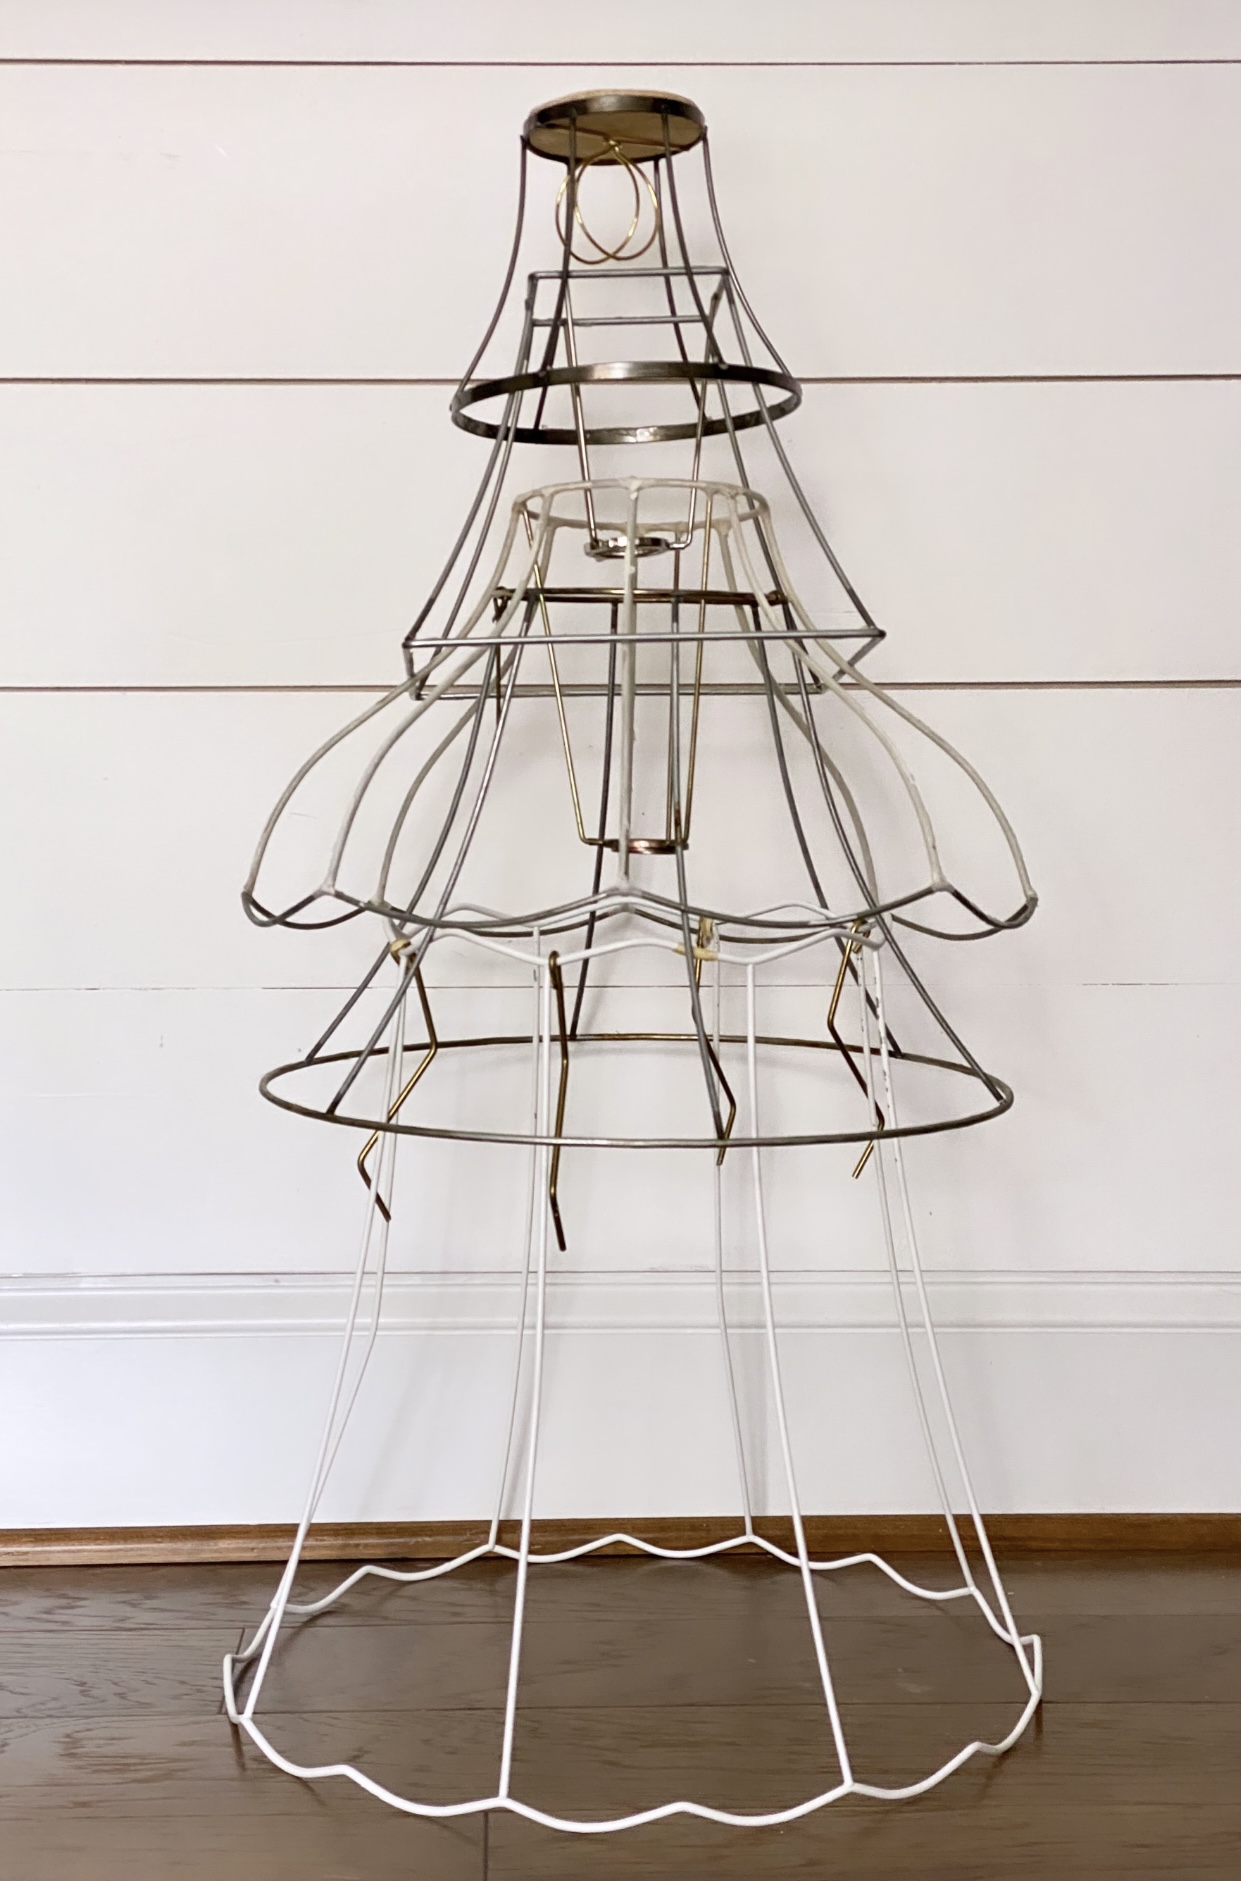 Six lampshade frames stacked on top of one another creating the form of a Christmas tree.